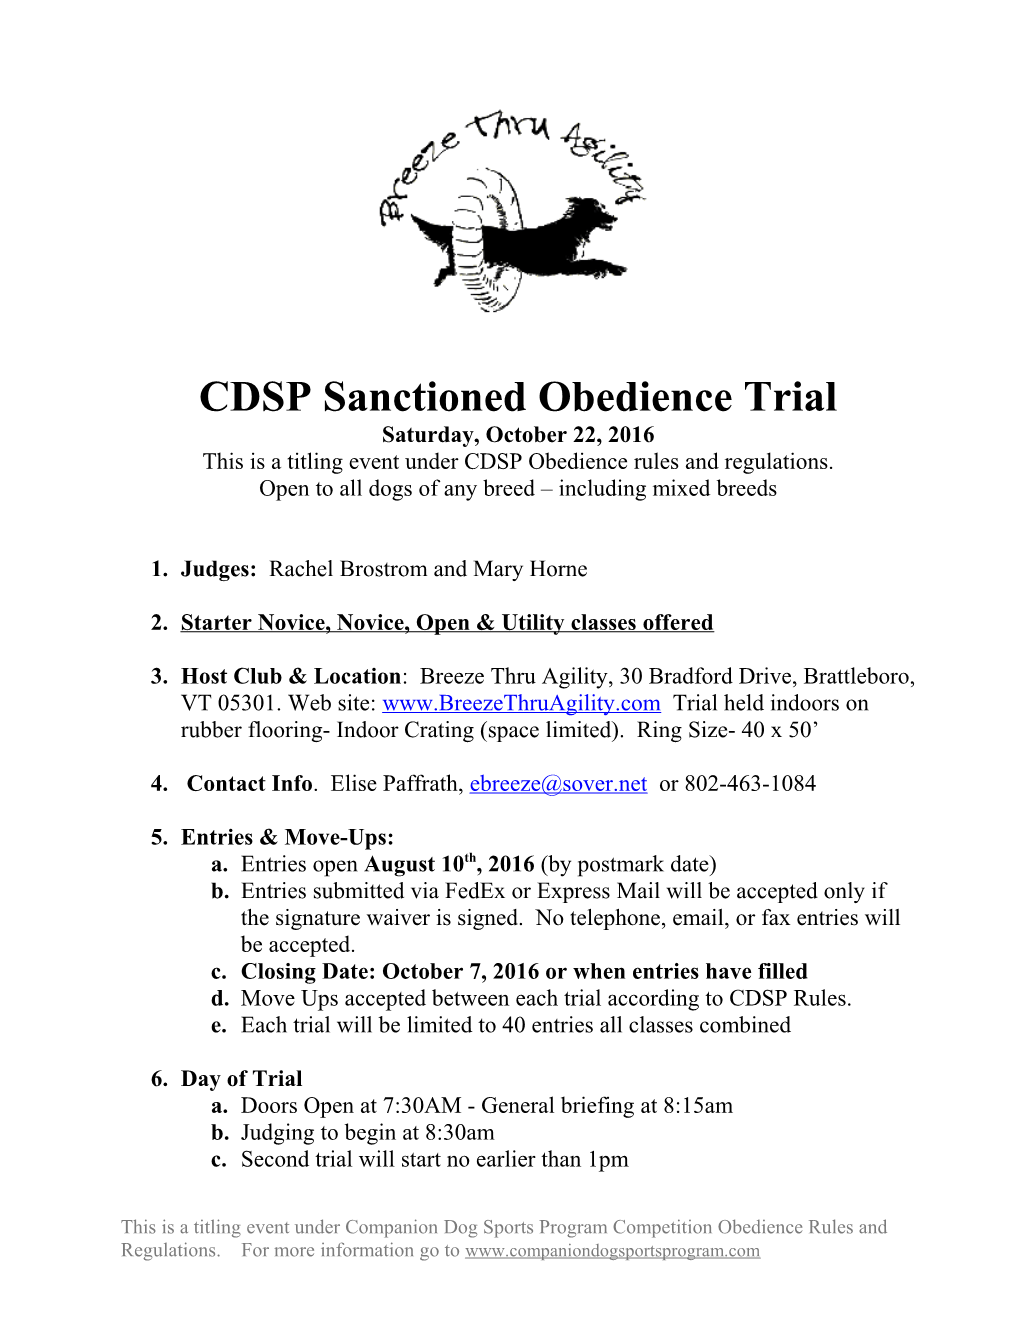 CDSP Sanctioned Obedience Trial